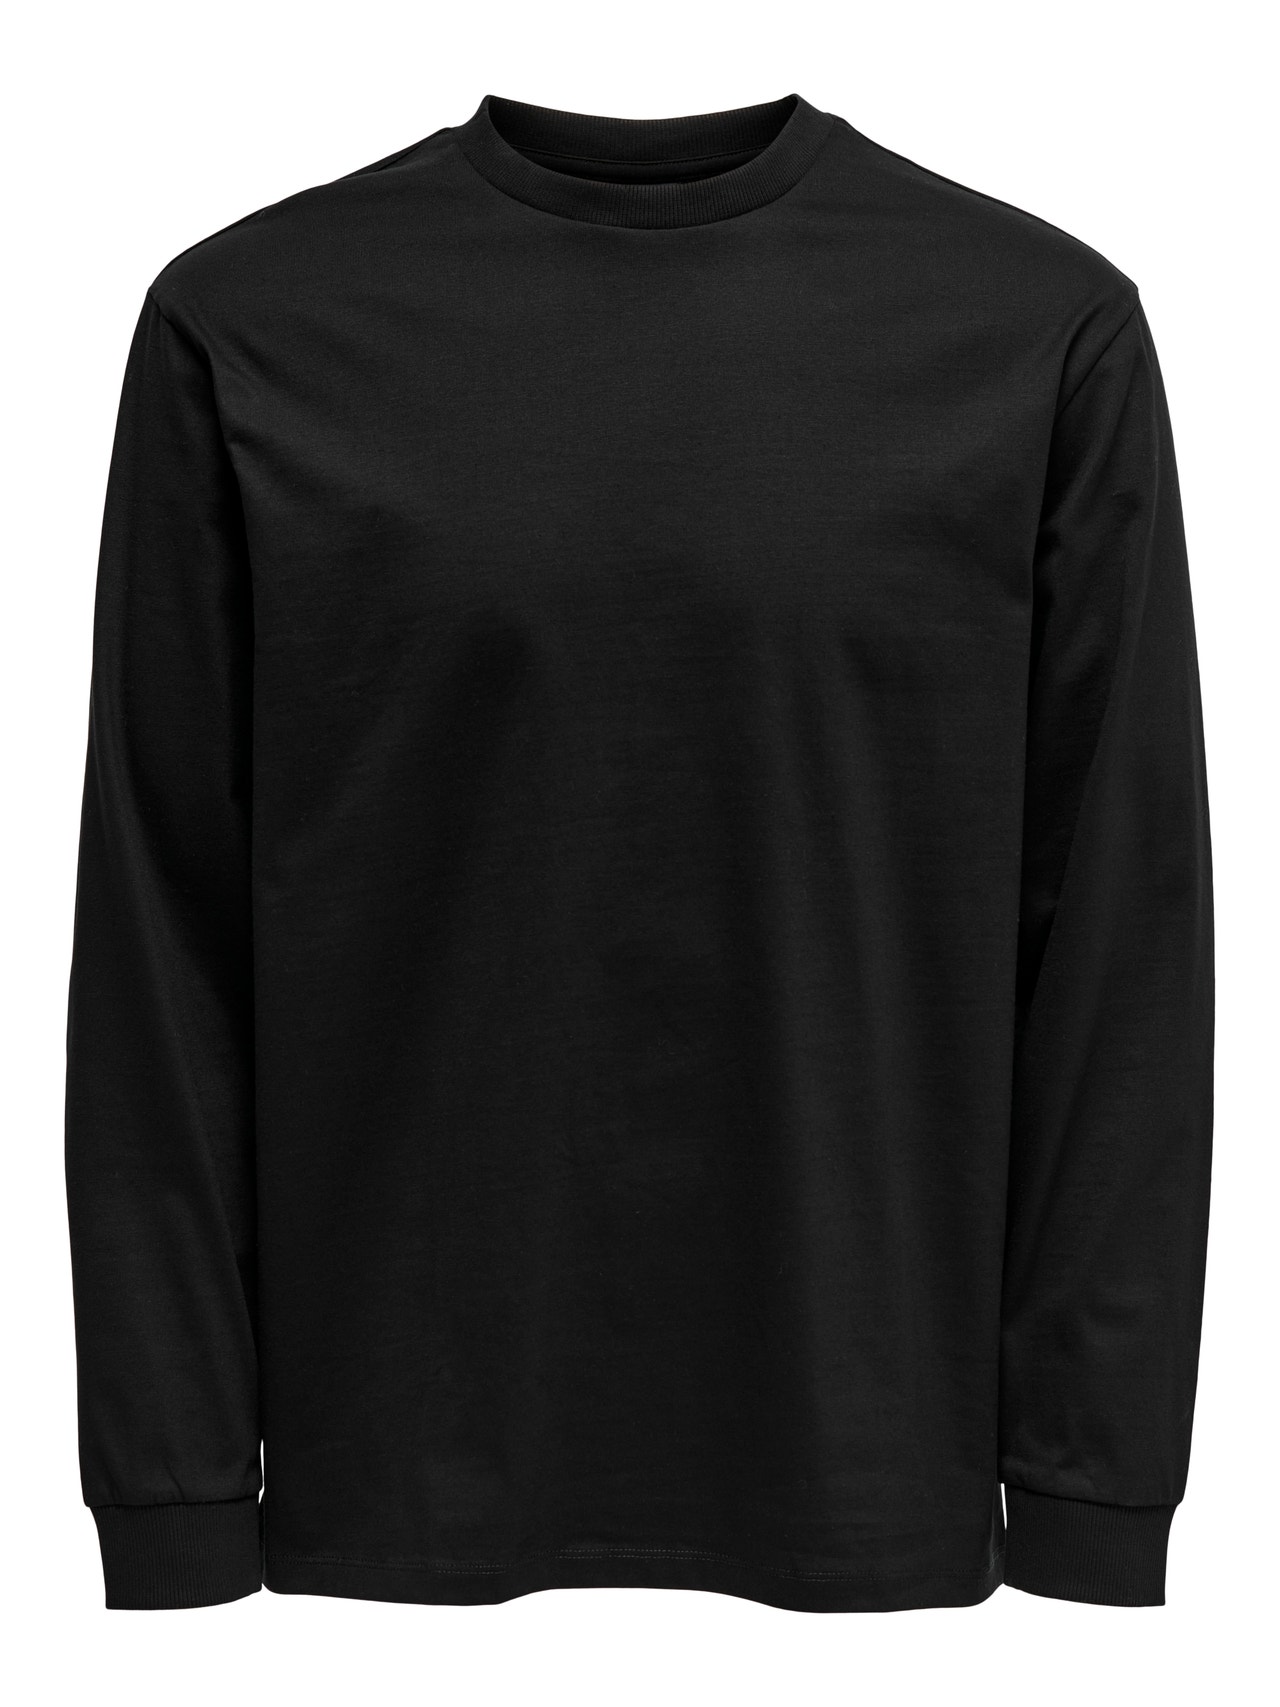 ONLY & SONS Regular Fit Round Neck T-Shirt -Black - 22023810